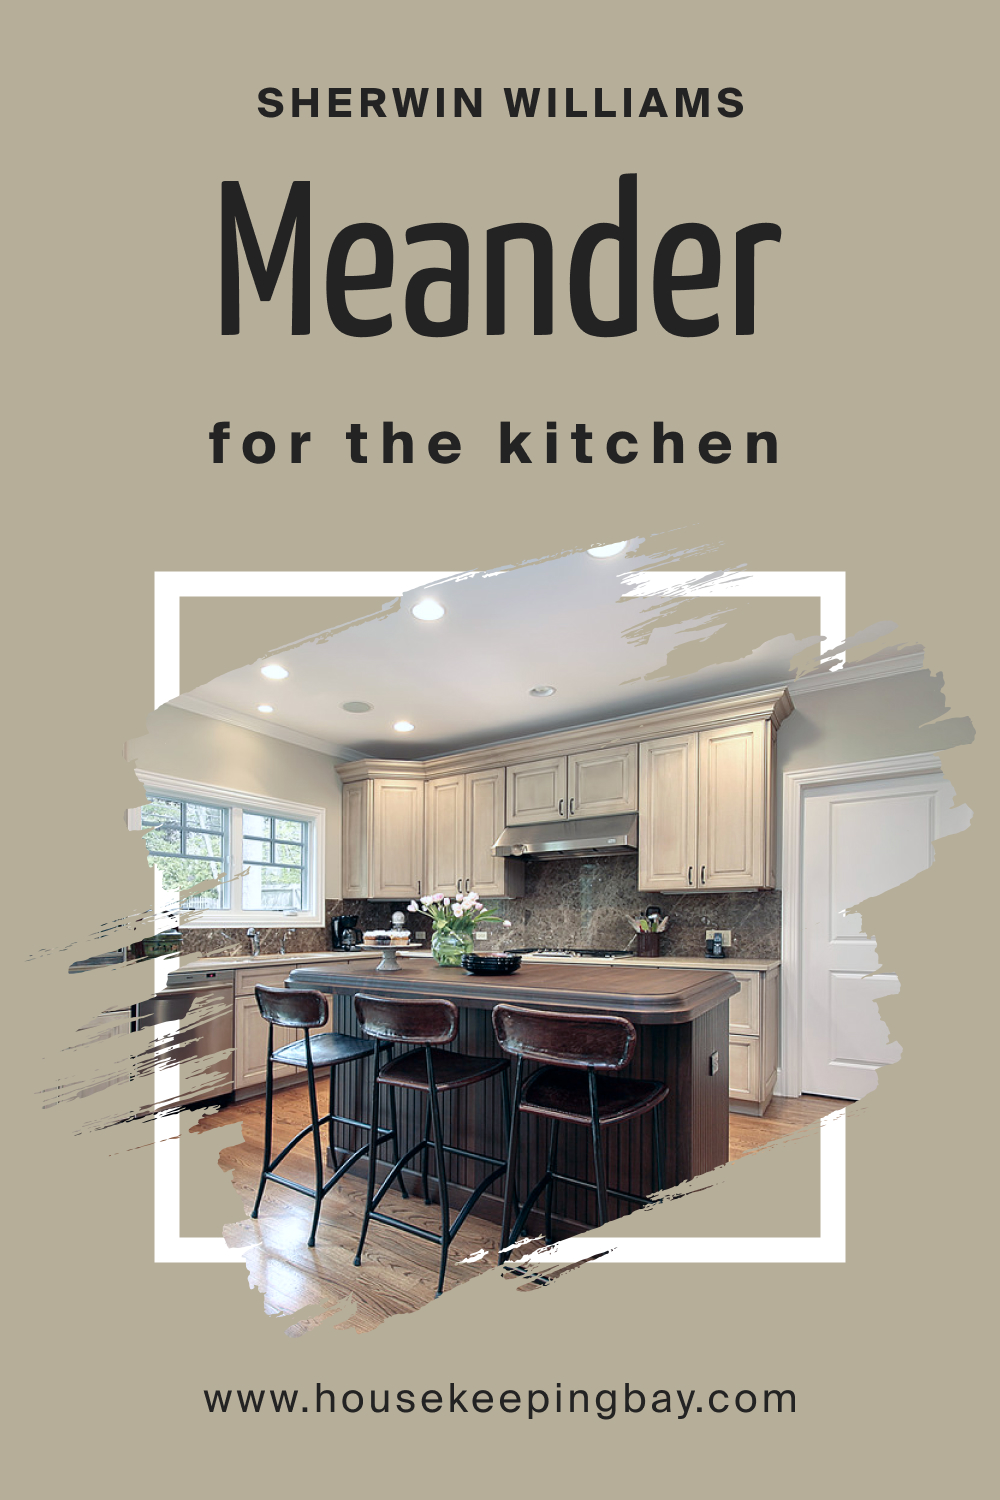 Sherwin Williams. SW 9522 Meander For the Kitchens